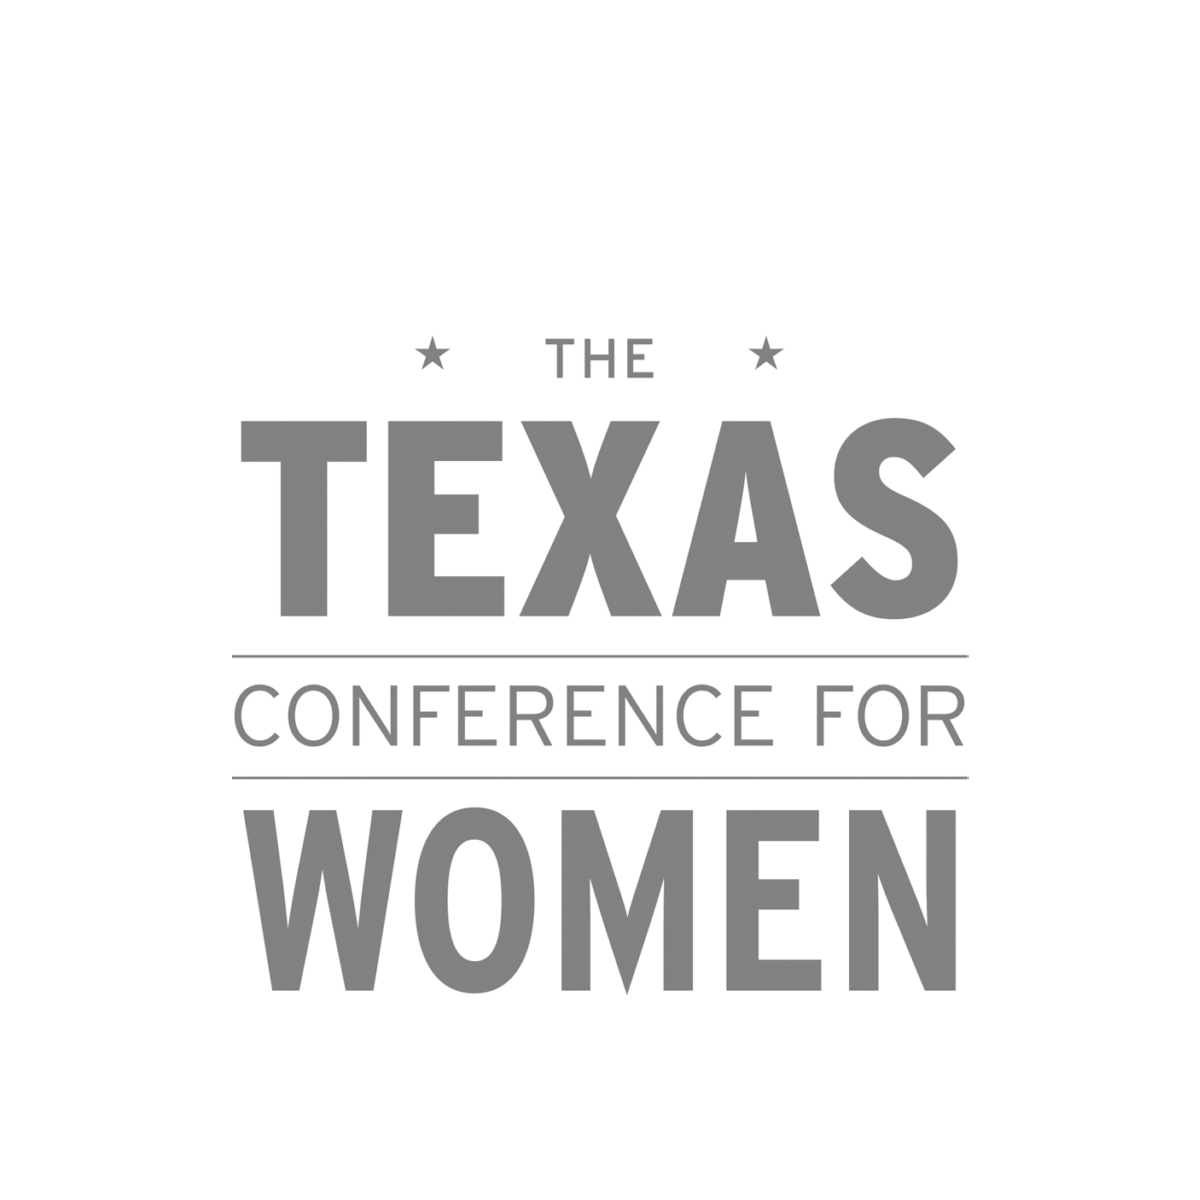 TEXAS CONFERENCE FOR WOMEN LOGO